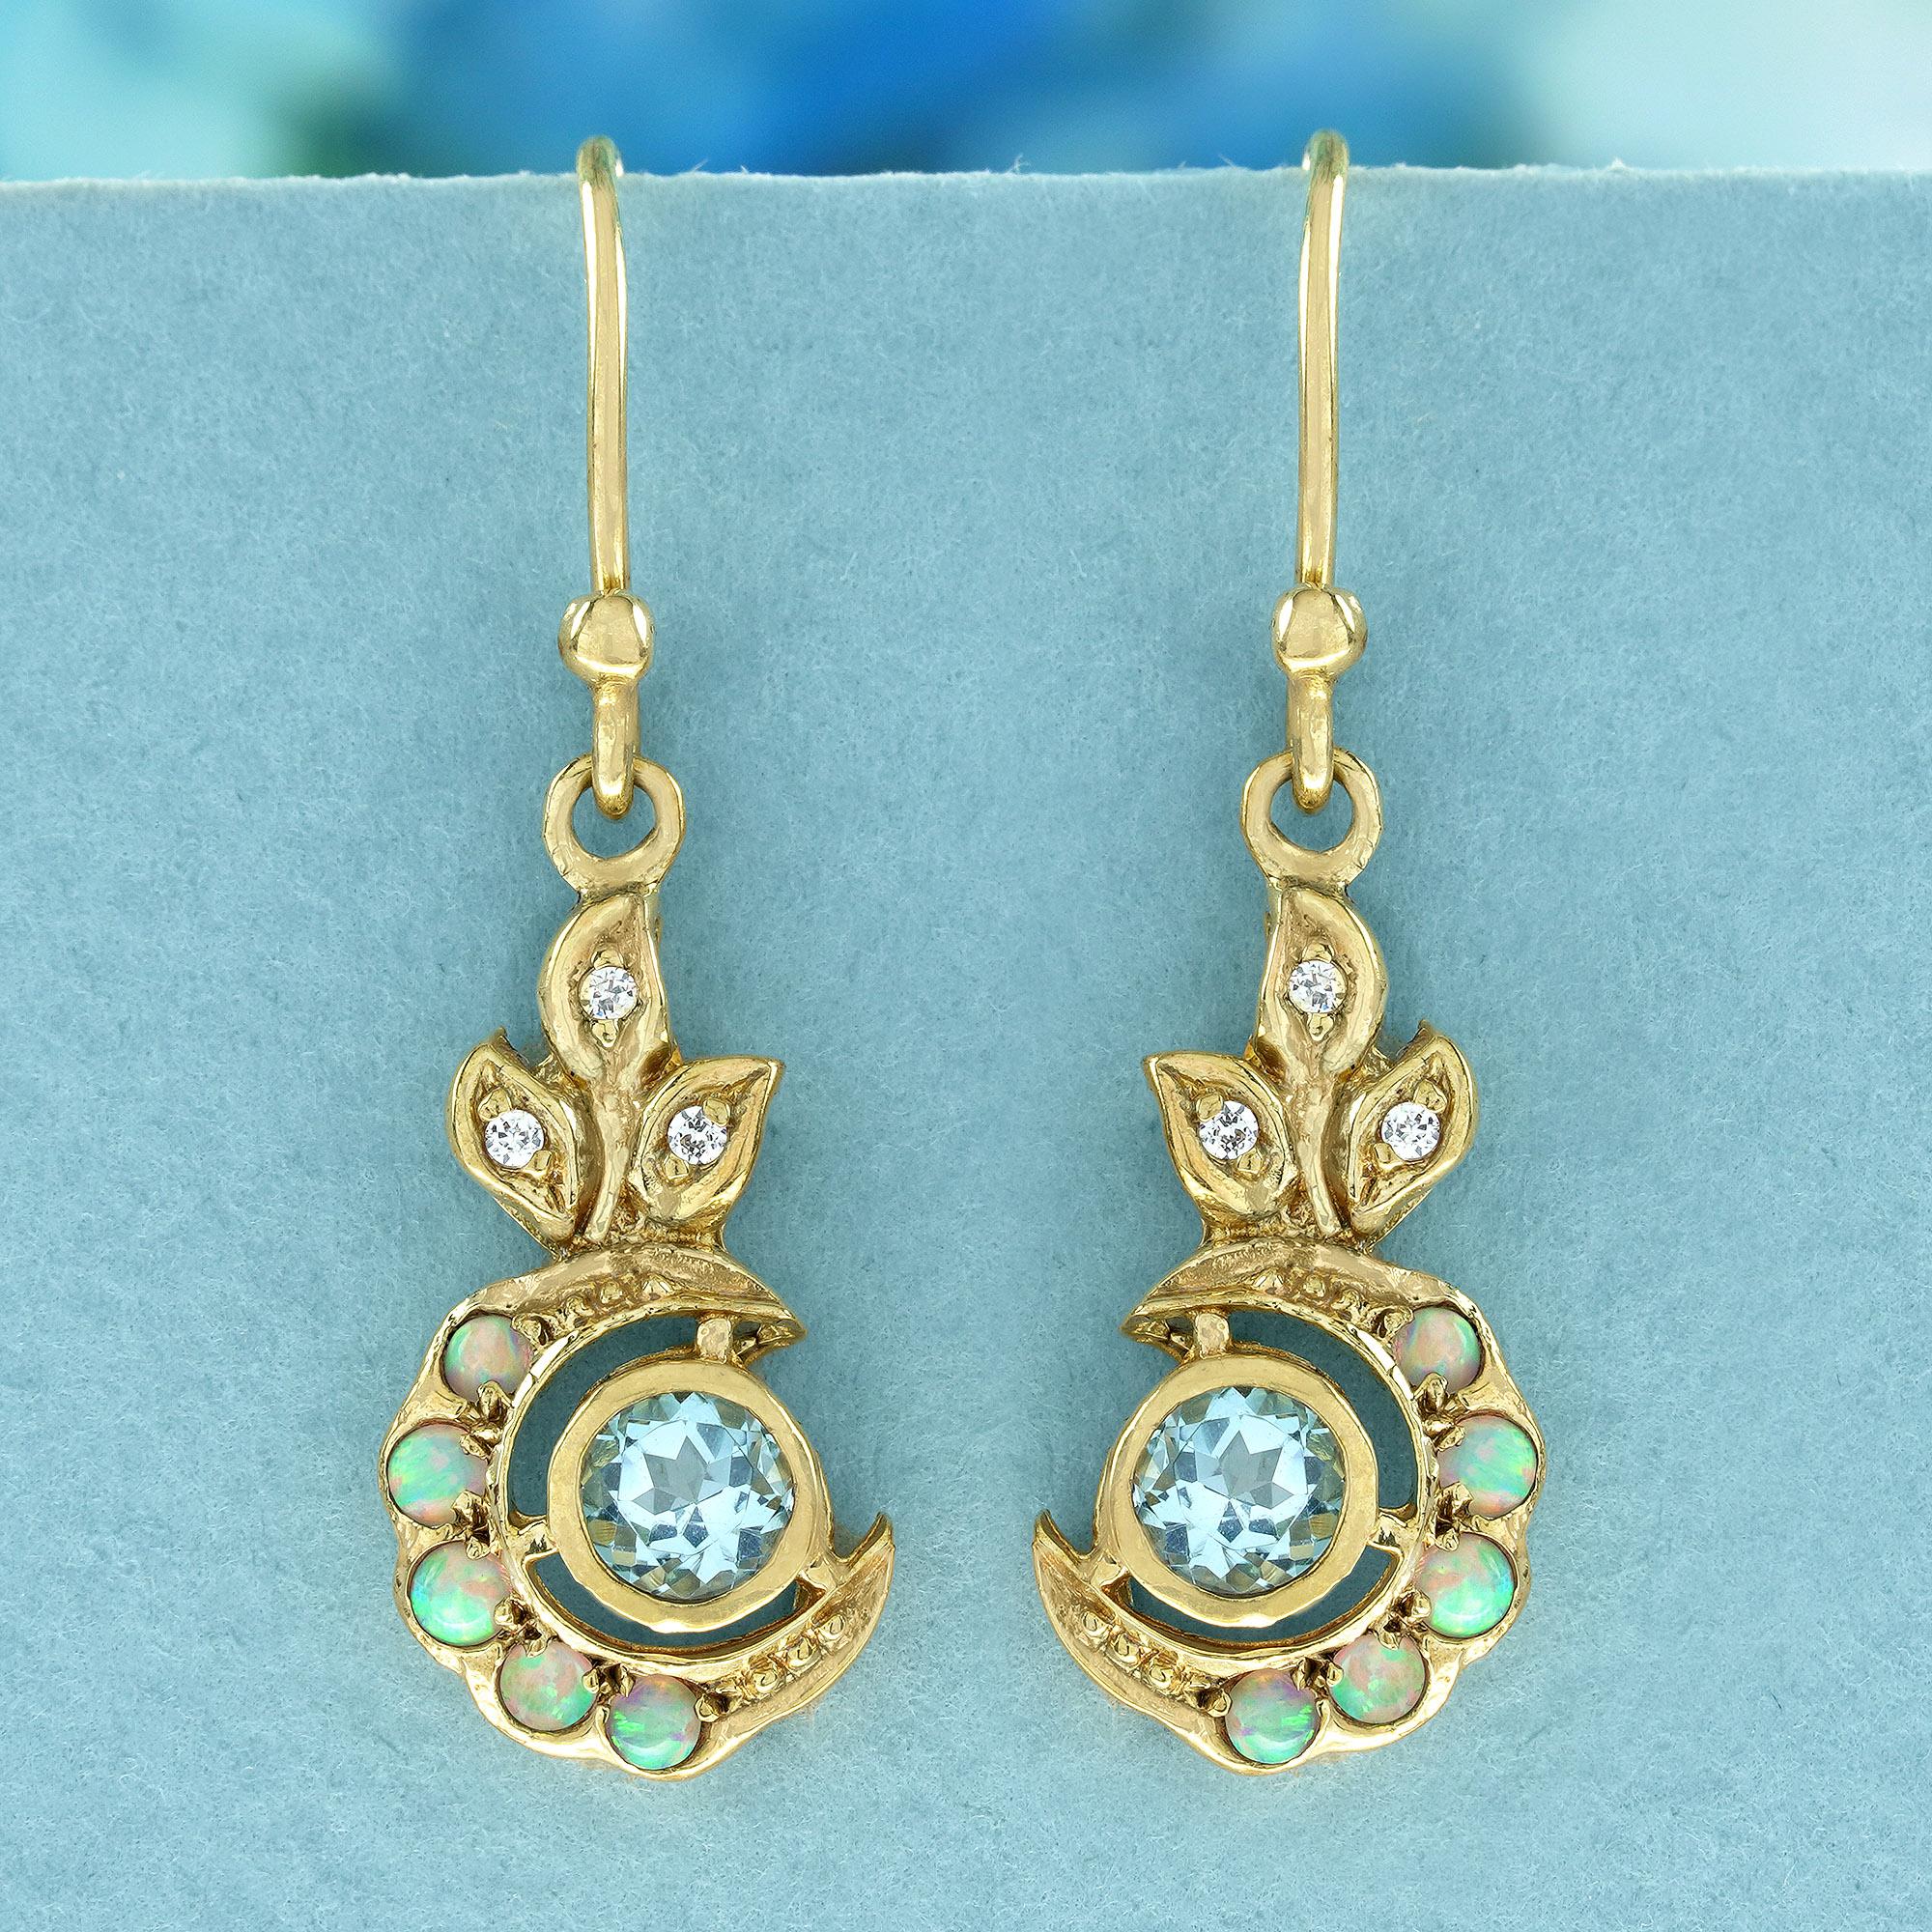 These enchanting vintage-inspired dangle earrings bloom with vibrant color. A round blue topaz gemstone take center stage, nestled in a crescent moon of warm yellow gold.
 Delicate white opals peek through the gold, adding a touch of shimmer and